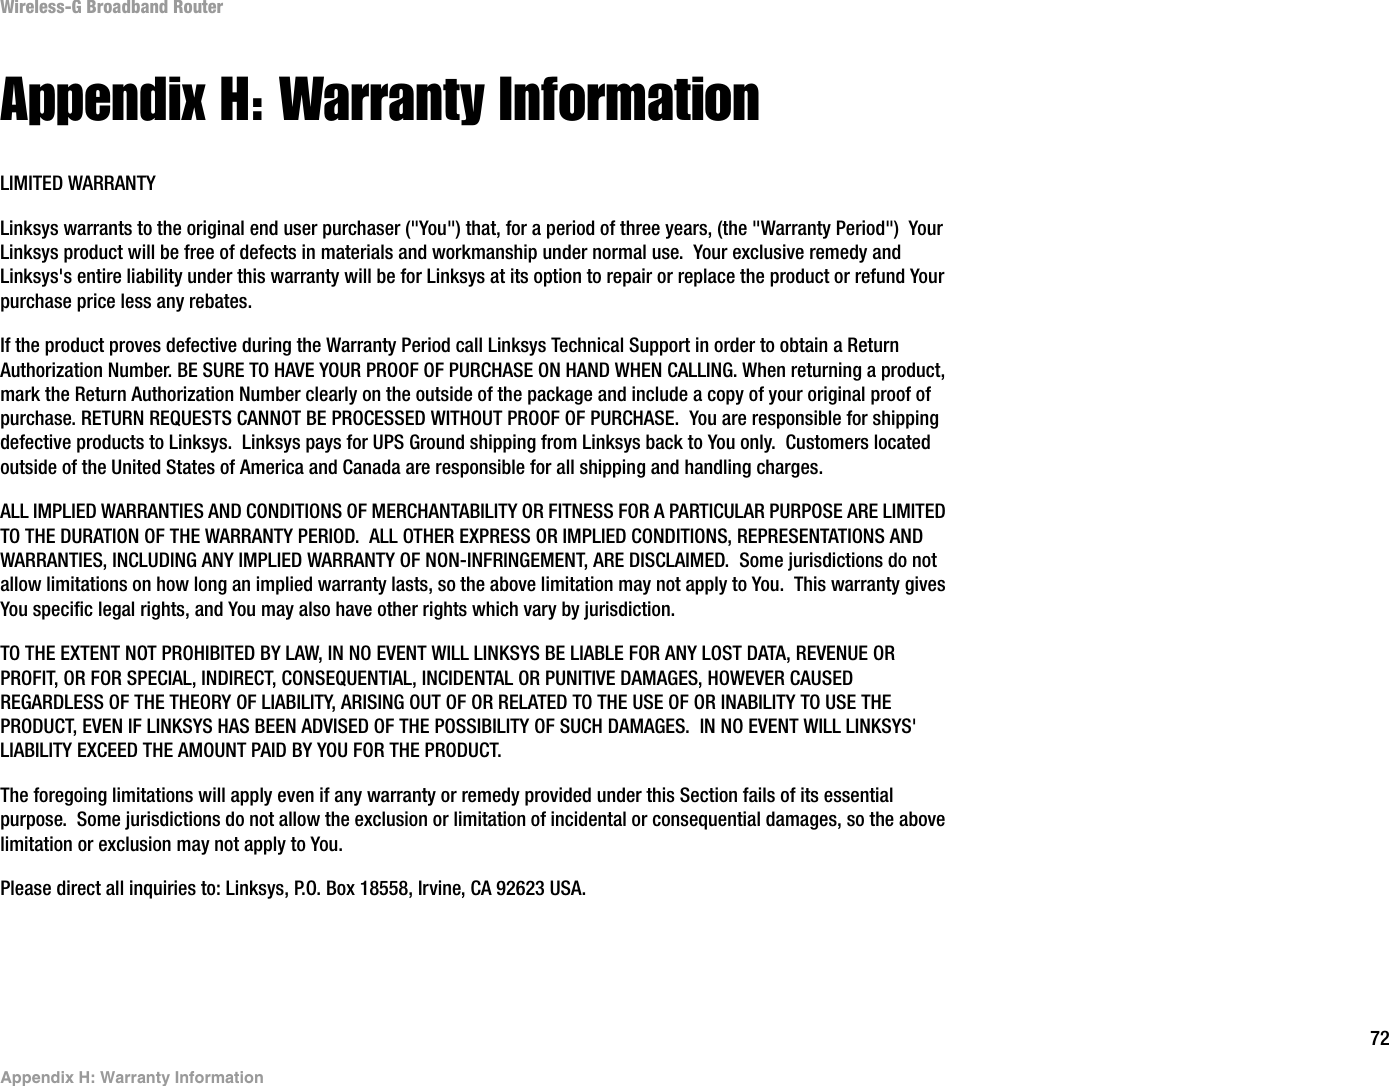 72Appendix H: Warranty InformationWireless-G Broadband RouterAppendix H: Warranty InformationLIMITED WARRANTYLinksys warrants to the original end user purchaser (&quot;You&quot;) that, for a period of three years, (the &quot;Warranty Period&quot;)  Your Linksys product will be free of defects in materials and workmanship under normal use.  Your exclusive remedy and Linksys&apos;s entire liability under this warranty will be for Linksys at its option to repair or replace the product or refund Yourpurchase price less any rebates.If the product proves defective during the Warranty Period call Linksys Technical Support in order to obtain a Return Authorization Number. BE SURE TO HAVE YOUR PROOF OF PURCHASE ON HAND WHEN CALLING. When returning a product, mark the Return Authorization Number clearly on the outside of the package and include a copy of your original proof of purchase. RETURN REQUESTS CANNOT BE PROCESSED WITHOUT PROOF OF PURCHASE.  You are responsible for shipping defective products to Linksys.  Linksys pays for UPS Ground shipping from Linksys back to You only.  Customers located outside of the United States of America and Canada are responsible for all shipping and handling charges. ALL IMPLIED WARRANTIES AND CONDITIONS OF MERCHANTABILITY OR FITNESS FOR A PARTICULAR PURPOSE ARE LIMITED TO THE DURATION OF THE WARRANTY PERIOD.  ALL OTHER EXPRESS OR IMPLIED CONDITIONS, REPRESENTATIONS AND WARRANTIES, INCLUDING ANY IMPLIED WARRANTY OF NON-INFRINGEMENT, ARE DISCLAIMED.  Some jurisdictions do not allow limitations on how long an implied warranty lasts, so the above limitation may not apply to You.  This warranty gives You specific legal rights, and You may also have other rights which vary by jurisdiction.TO THE EXTENT NOT PROHIBITED BY LAW, IN NO EVENT WILL LINKSYS BE LIABLE FOR ANY LOST DATA, REVENUE OR PROFIT, OR FOR SPECIAL, INDIRECT, CONSEQUENTIAL, INCIDENTAL OR PUNITIVE DAMAGES, HOWEVER CAUSED REGARDLESS OF THE THEORY OF LIABILITY, ARISING OUT OF OR RELATED TO THE USE OF OR INABILITY TO USE THE PRODUCT, EVEN IF LINKSYS HAS BEEN ADVISED OF THE POSSIBILITY OF SUCH DAMAGES.  IN NO EVENT WILL LINKSYS&apos; LIABILITY EXCEED THE AMOUNT PAID BY YOU FOR THE PRODUCT.  The foregoing limitations will apply even if any warranty or remedy provided under this Section fails of its essential purpose.  Some jurisdictions do not allow the exclusion or limitation of incidental or consequential damages, so the above limitation or exclusion may not apply to You.Please direct all inquiries to: Linksys, P.O. Box 18558, Irvine, CA 92623 USA.